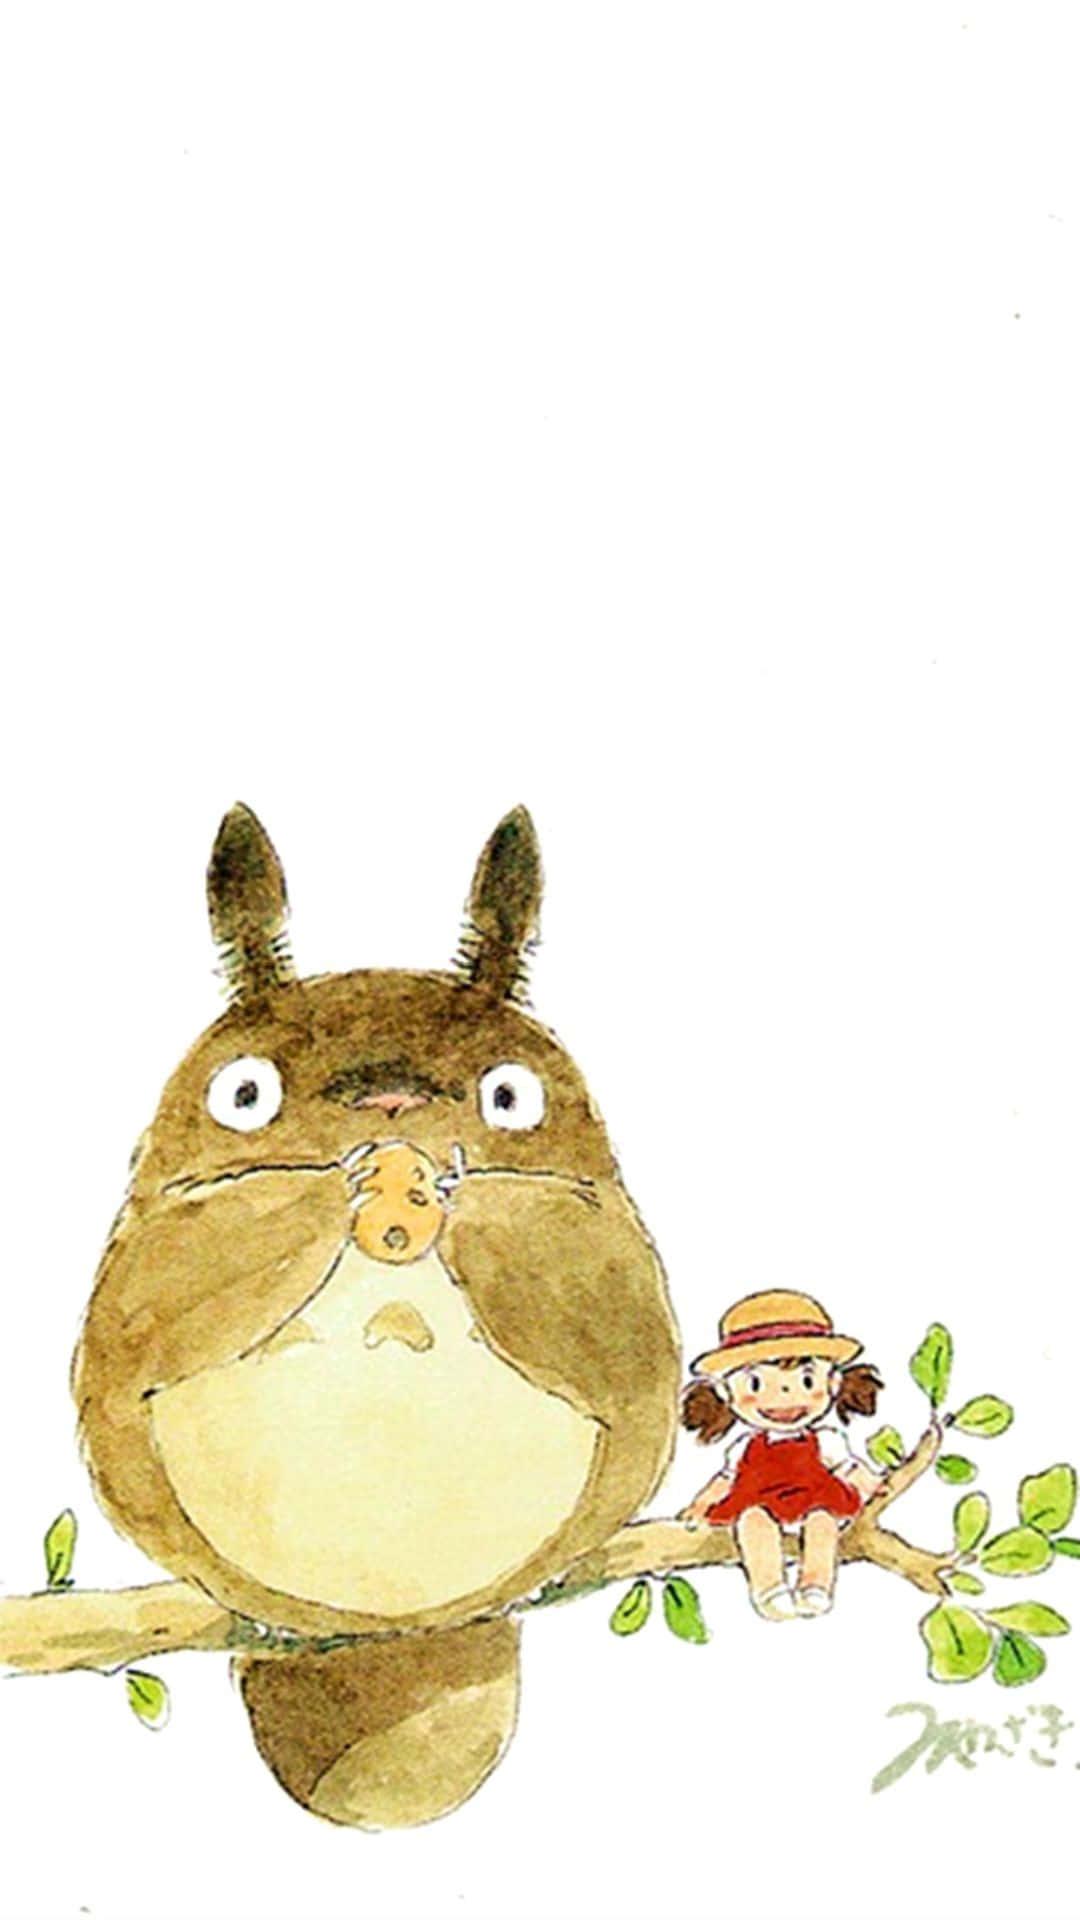 The adorably lovable, mysterious Totoro